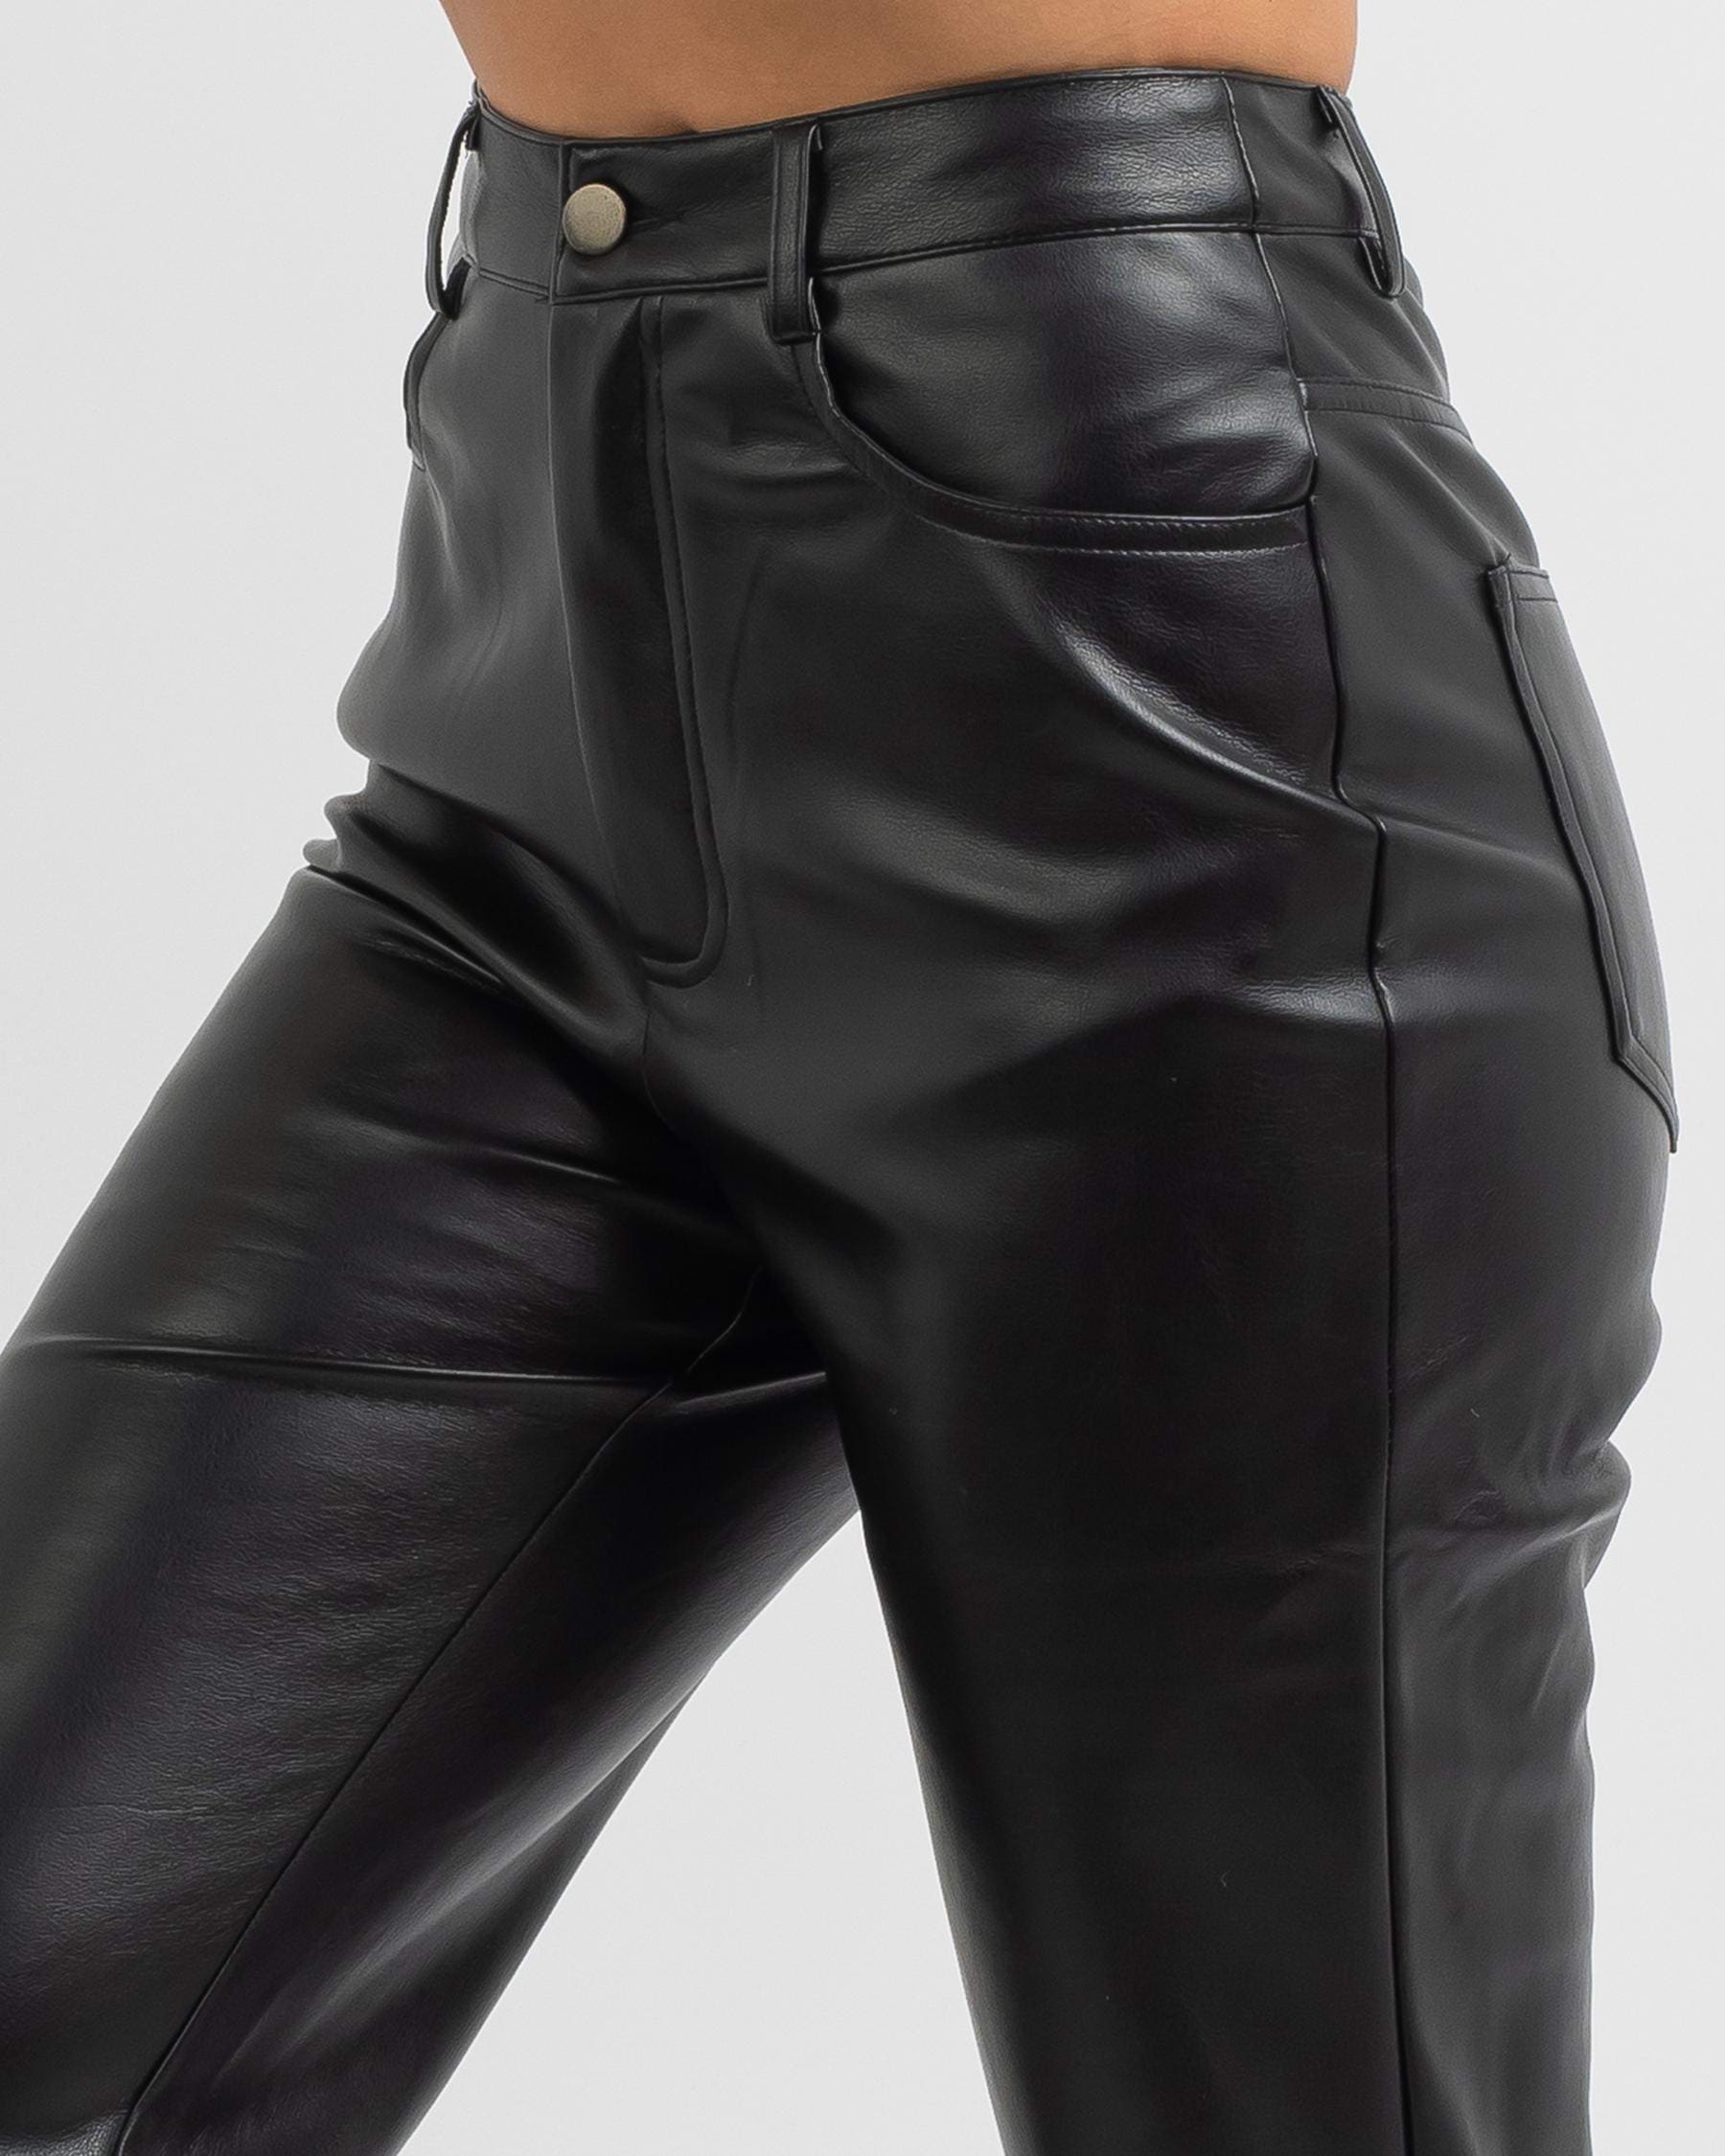 Winnie & Co Bea Pants In Black - Fast Shipping & Easy Returns - City ...